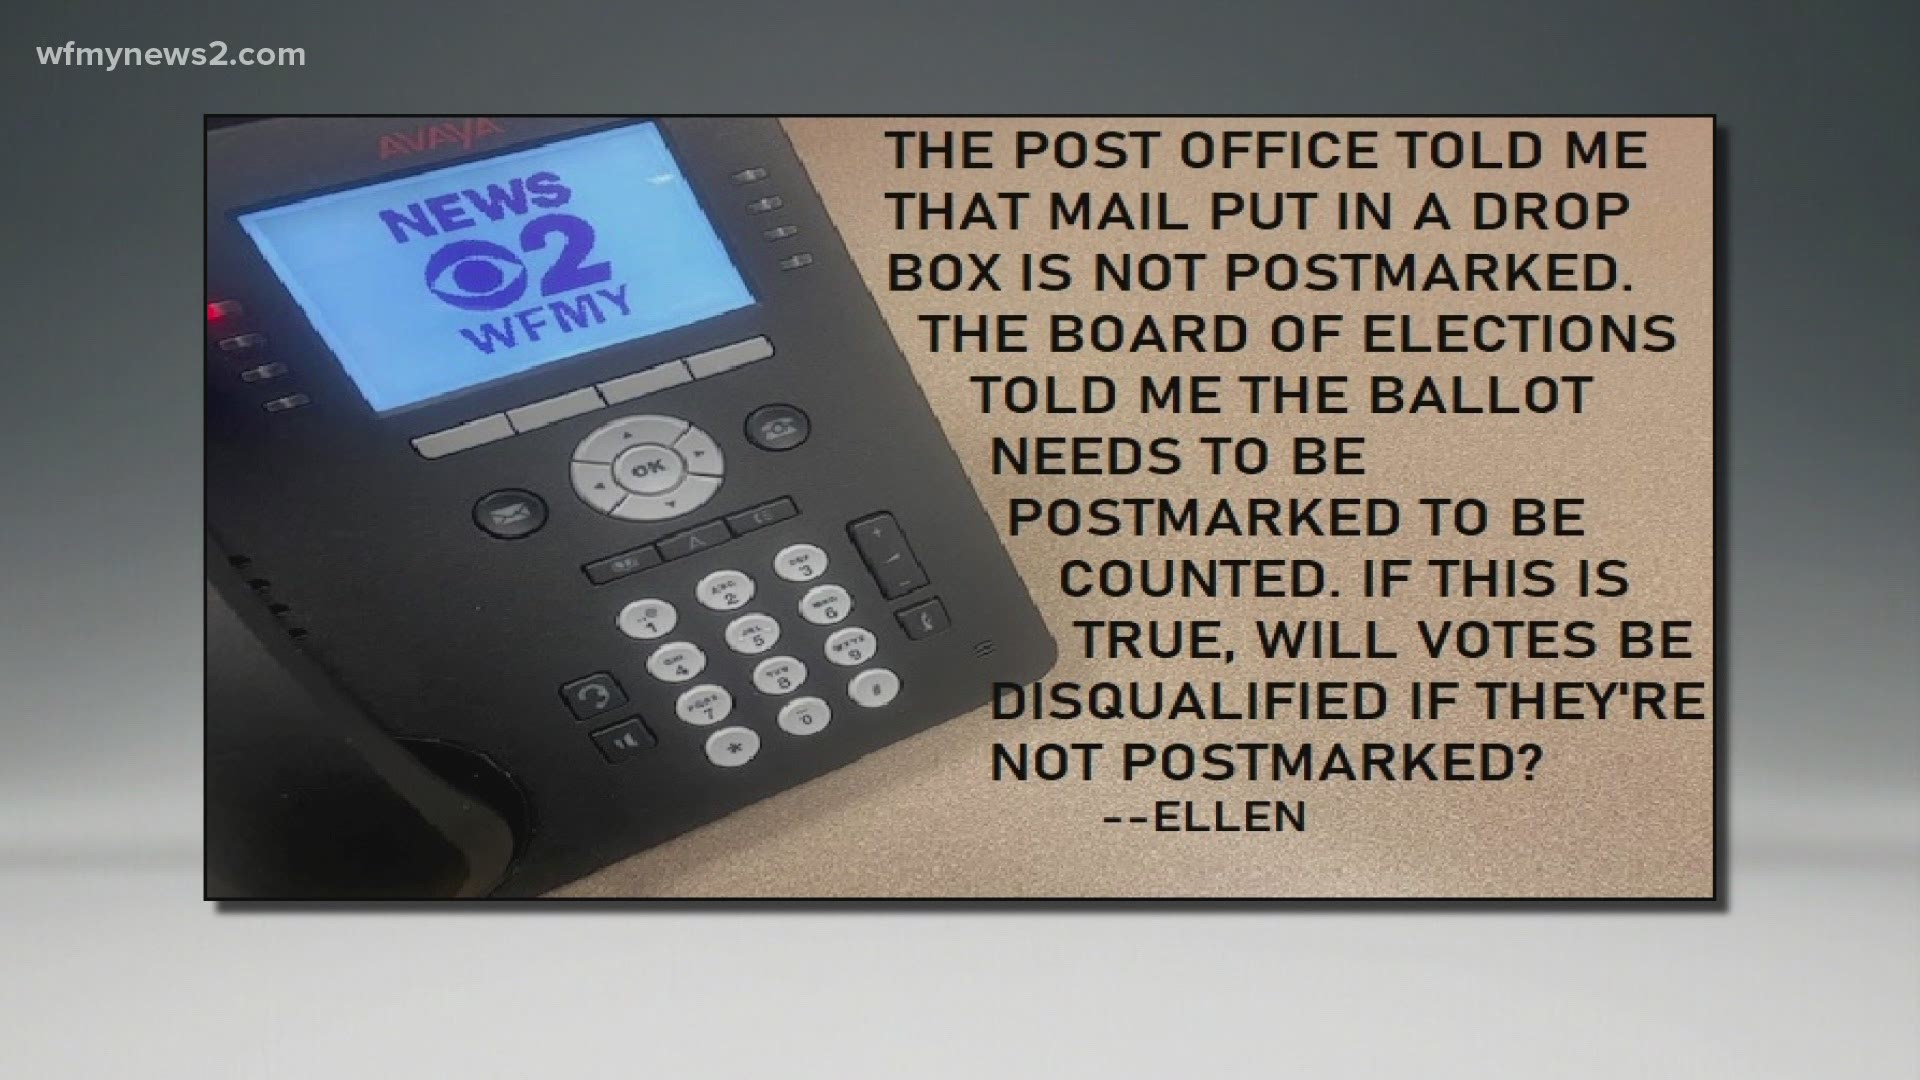 A viewer reached out to 2 Wants to Know to find out if her ballot would be counted if she put it in a dropbox. The answer is yes.